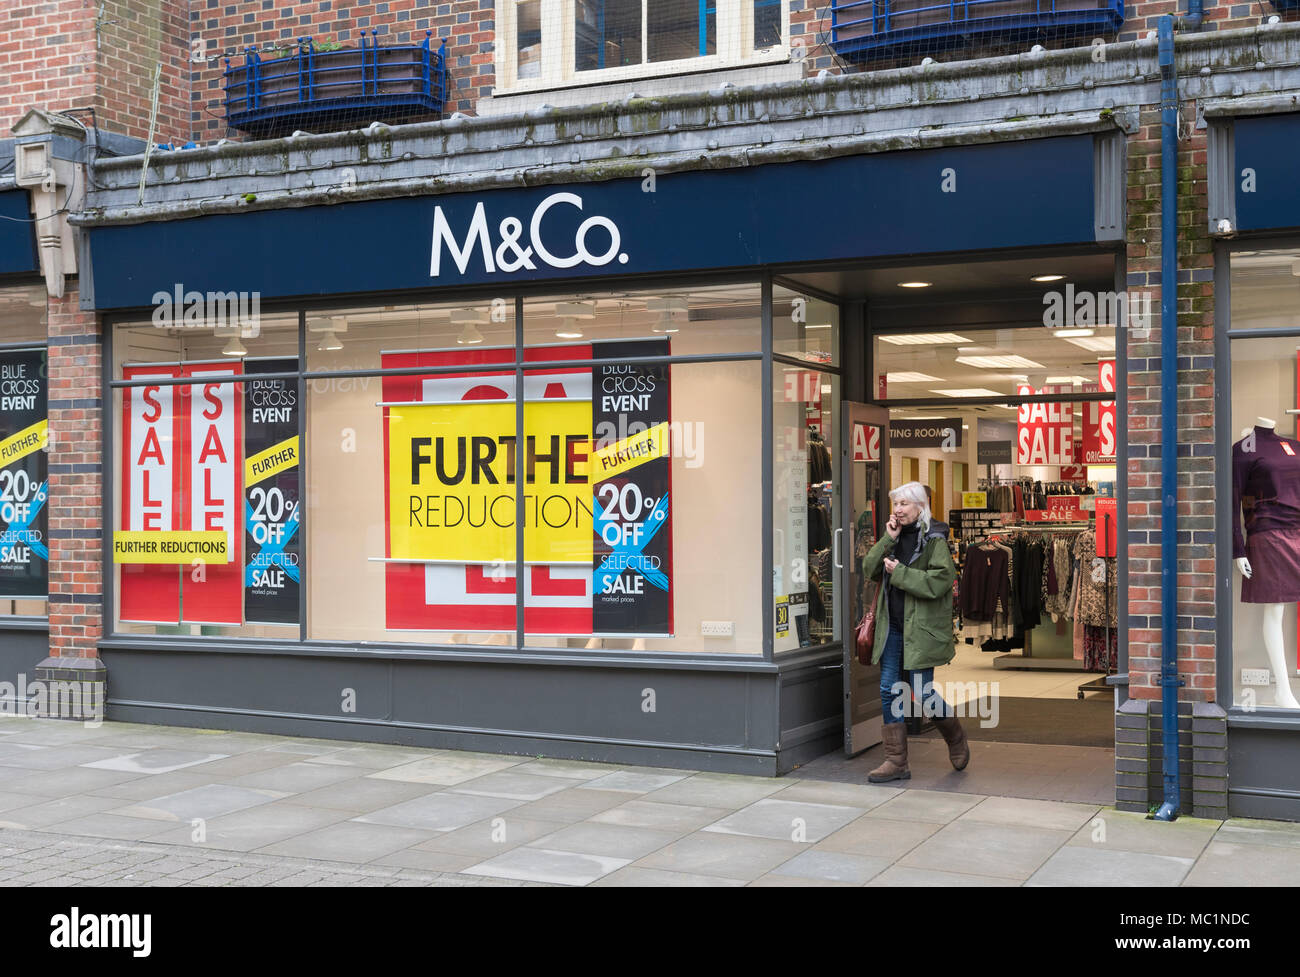 M&Co shop front entrance in England, UK. MandCo store UK. Retail store. Stock Photo